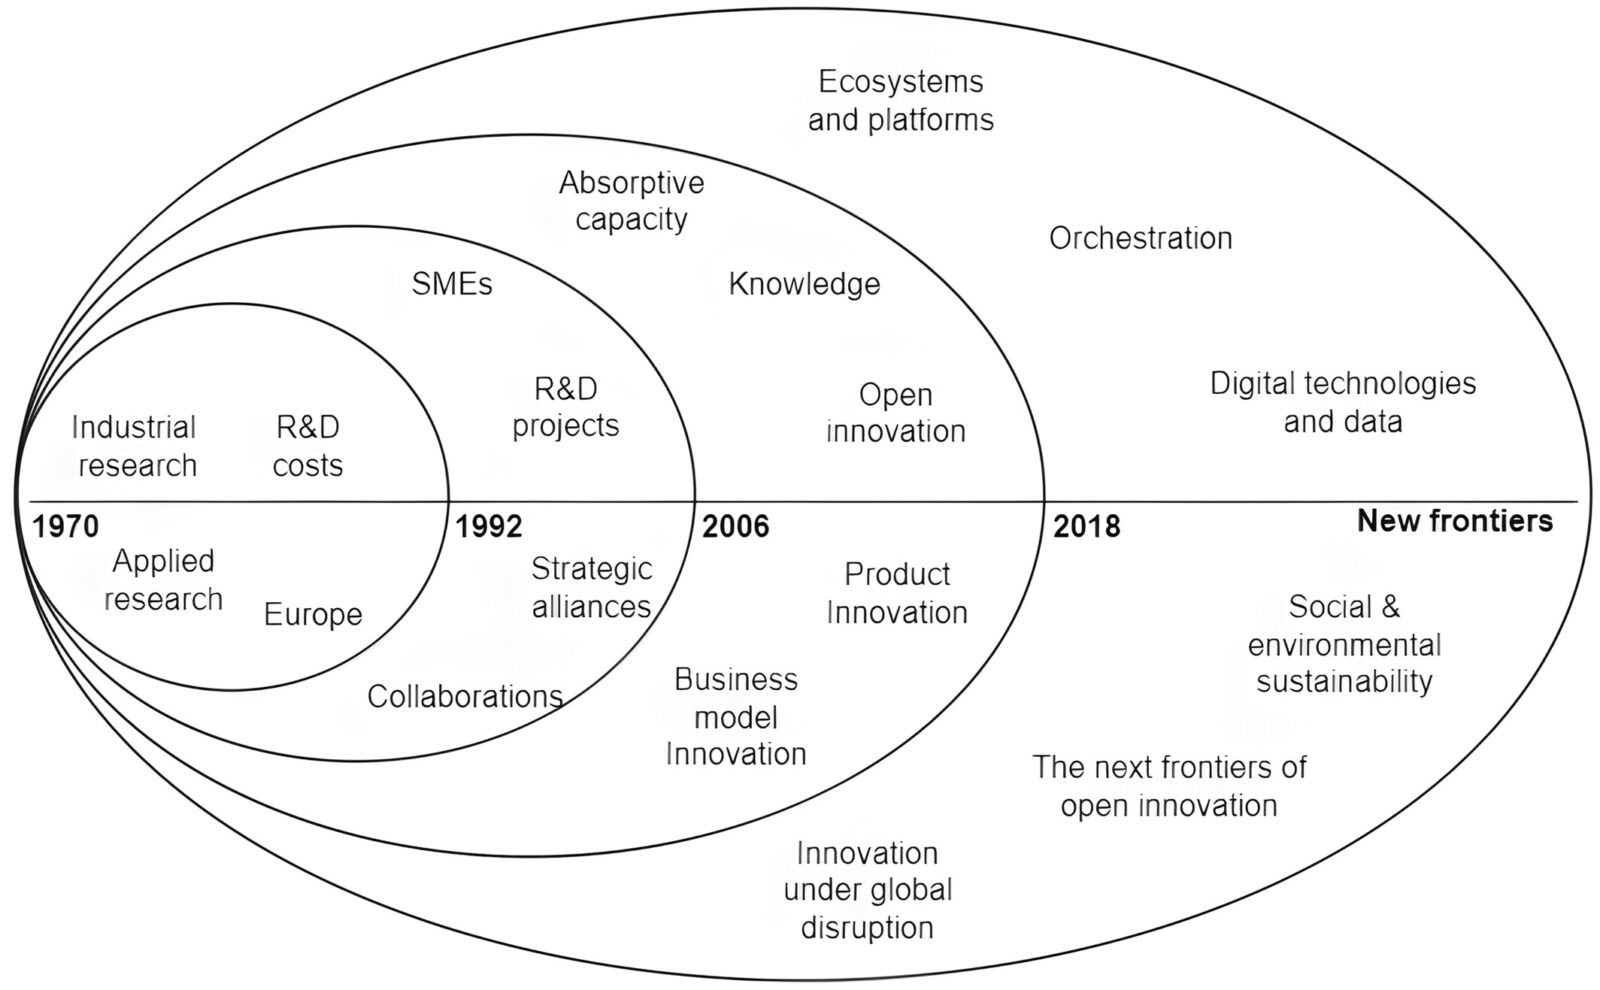 A snapshot of R&D Management research trajectories